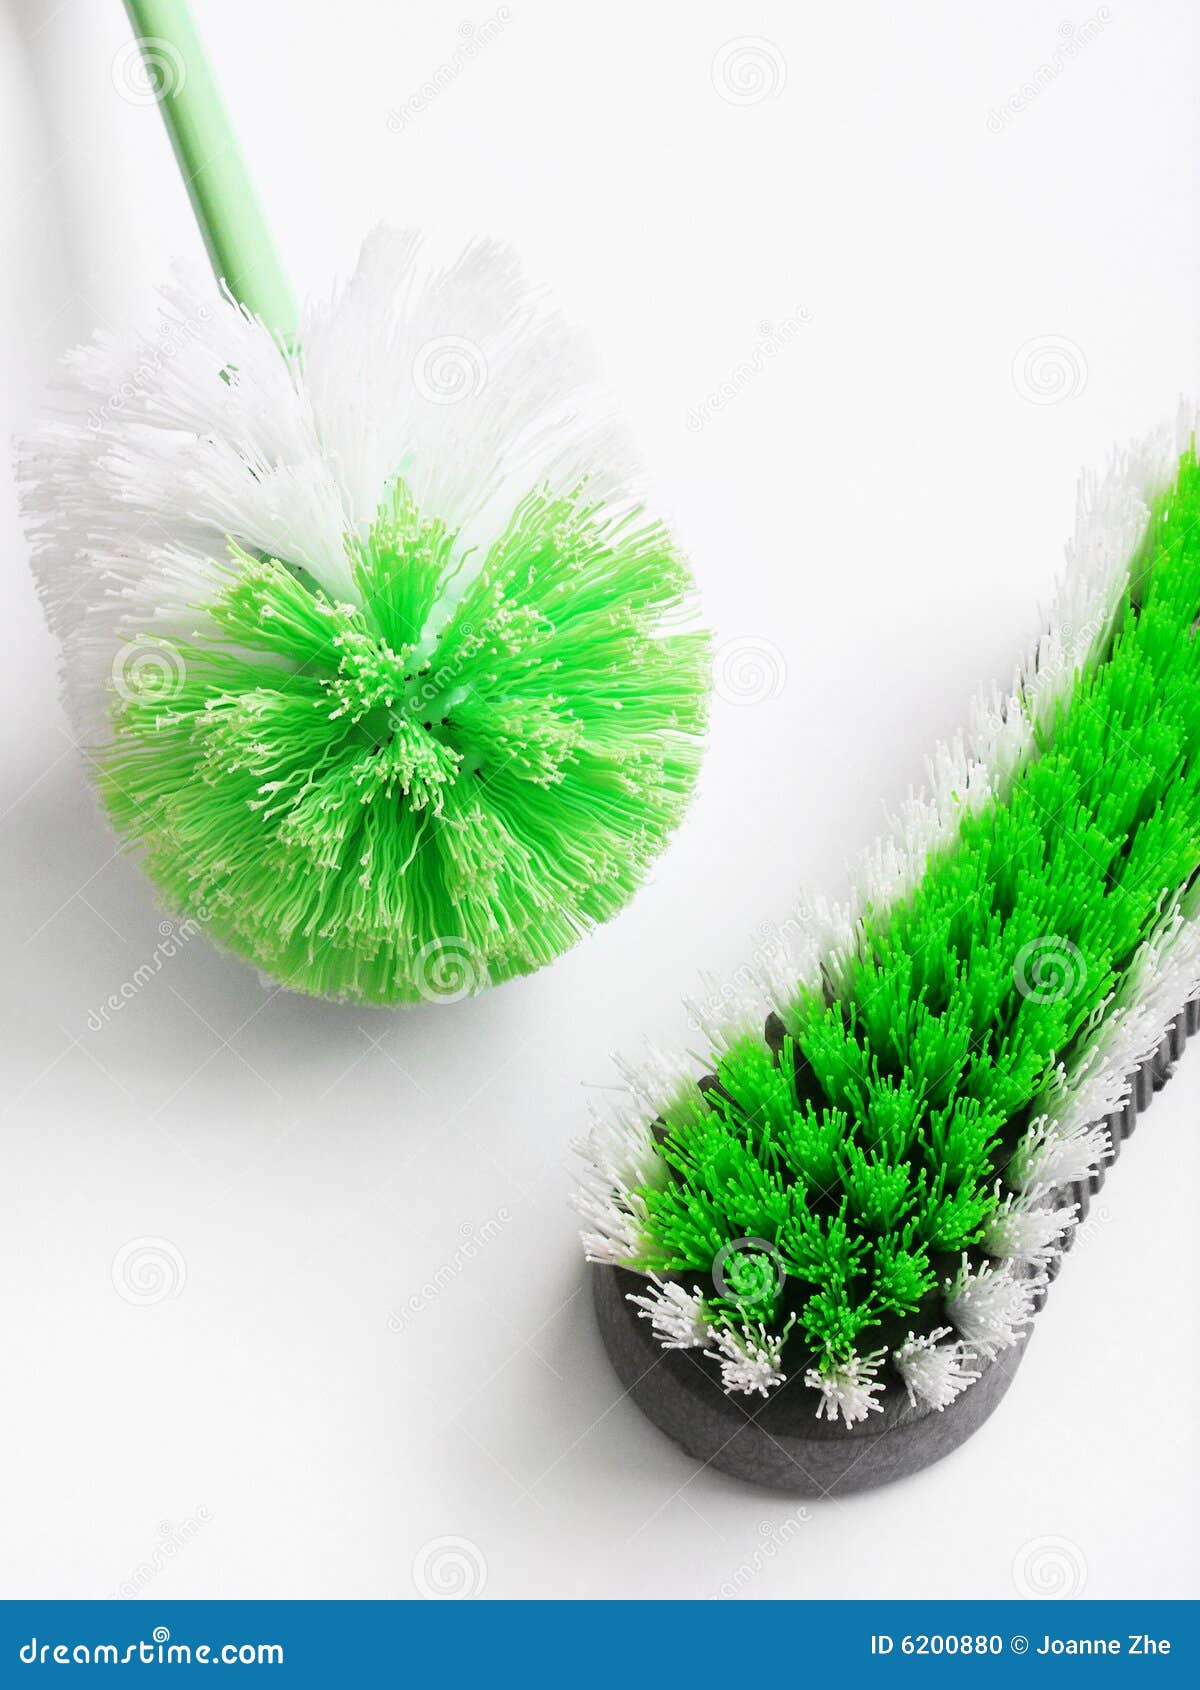 scrubbing cleaning brushes